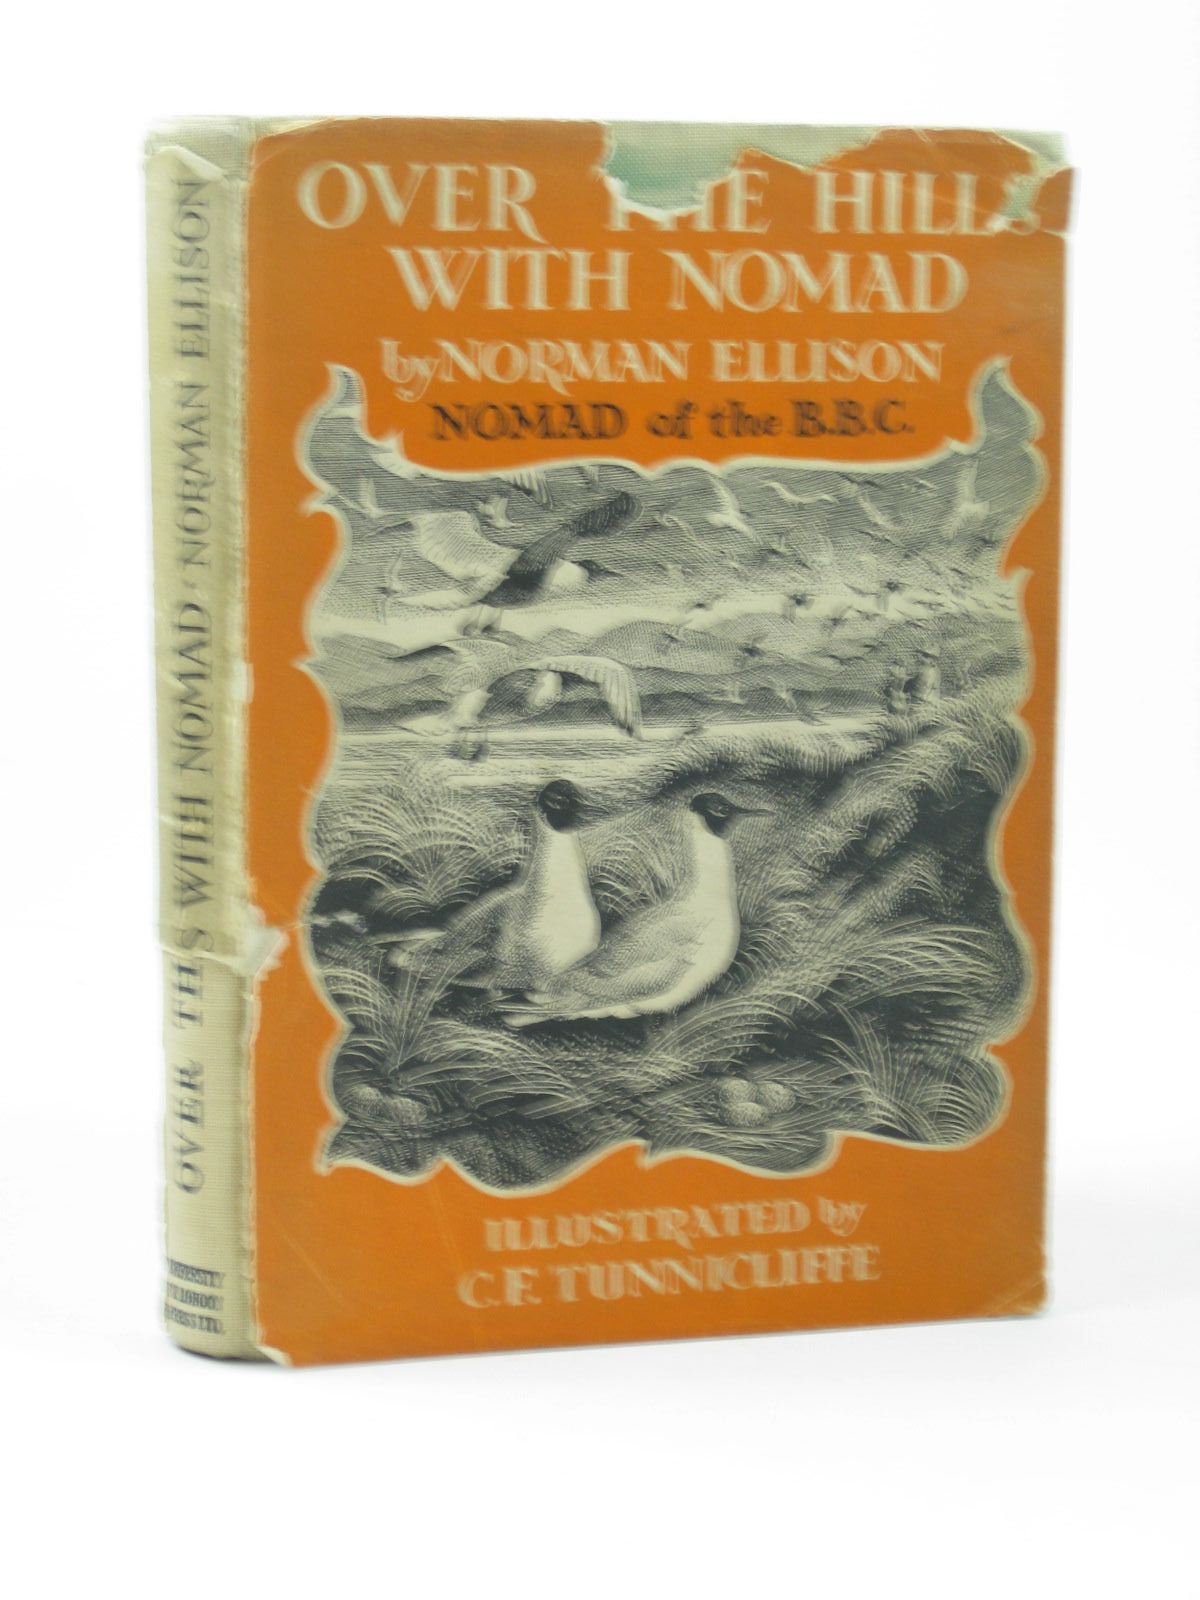 Photo of OVER THE HILLS WITH NOMAD written by Ellison, Norman illustrated by Tunnicliffe, C.F. published by University of London Press (STOCK CODE: 1312313)  for sale by Stella & Rose's Books